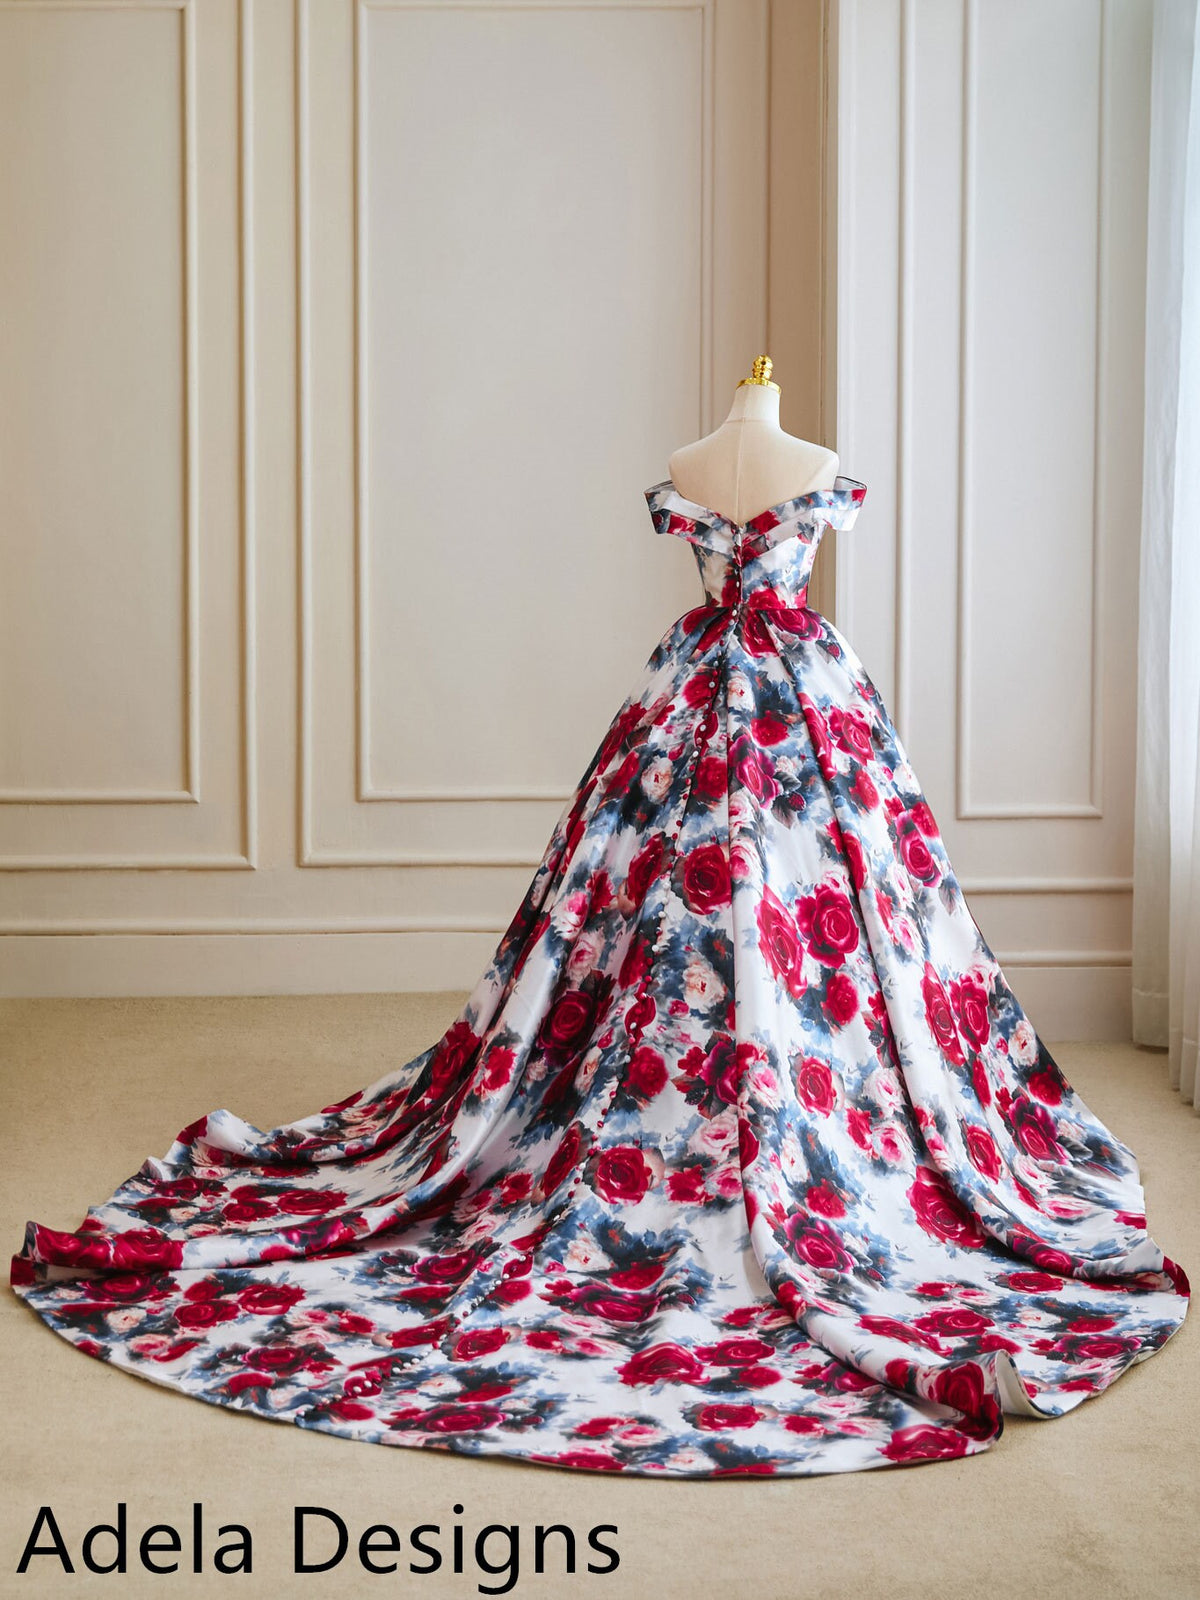 Floral Print Satin Ball Gown Wedding Dress Off the Shoulder Sleeves Bridal Gown Aline Style Open Back Buttons All the Way Down Roses